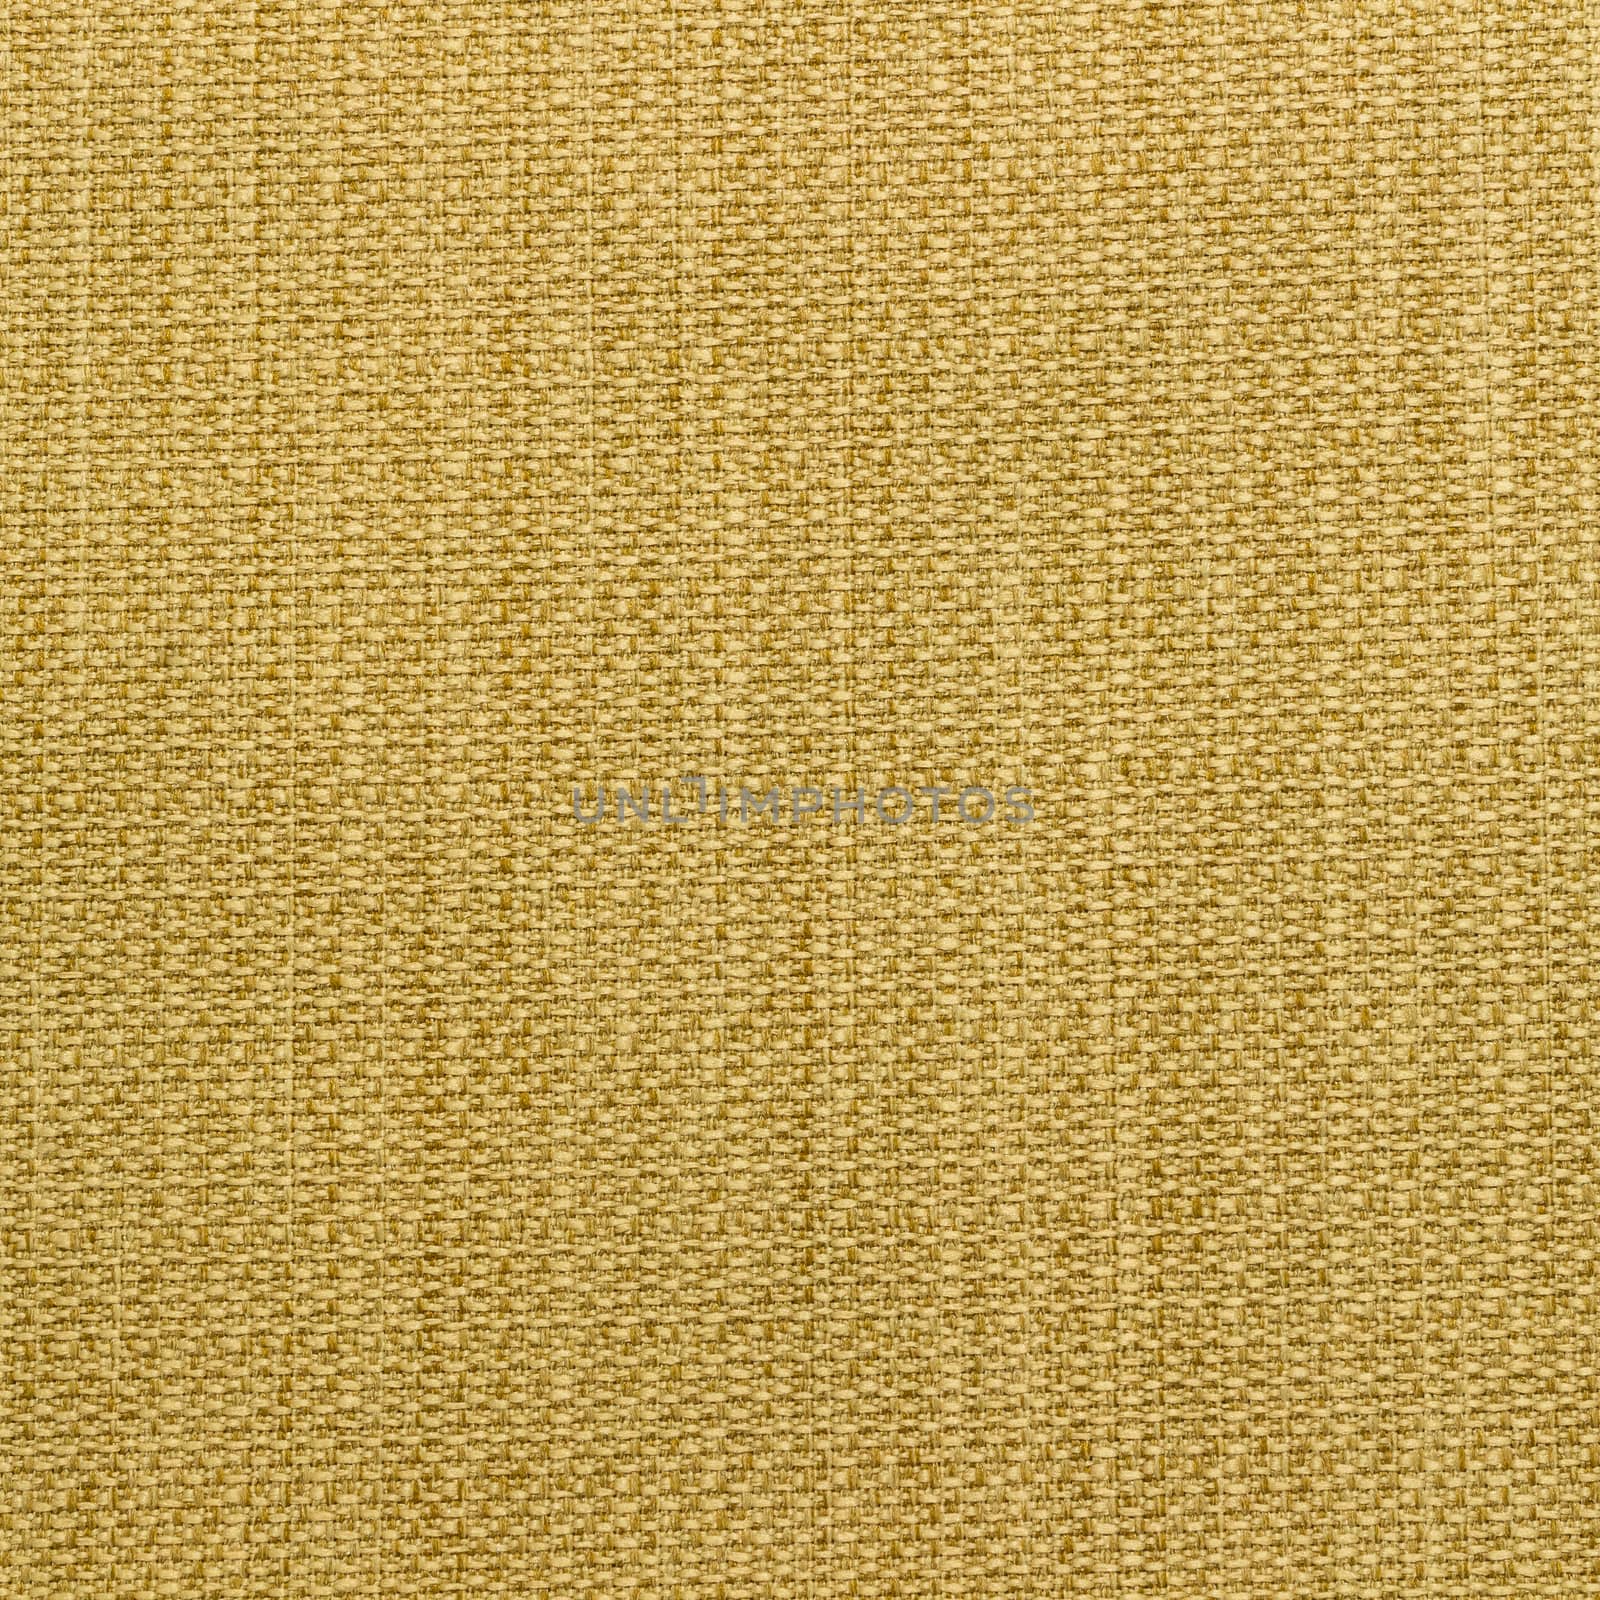 Rustic canvas fabric texture in Yellow color. Square shape